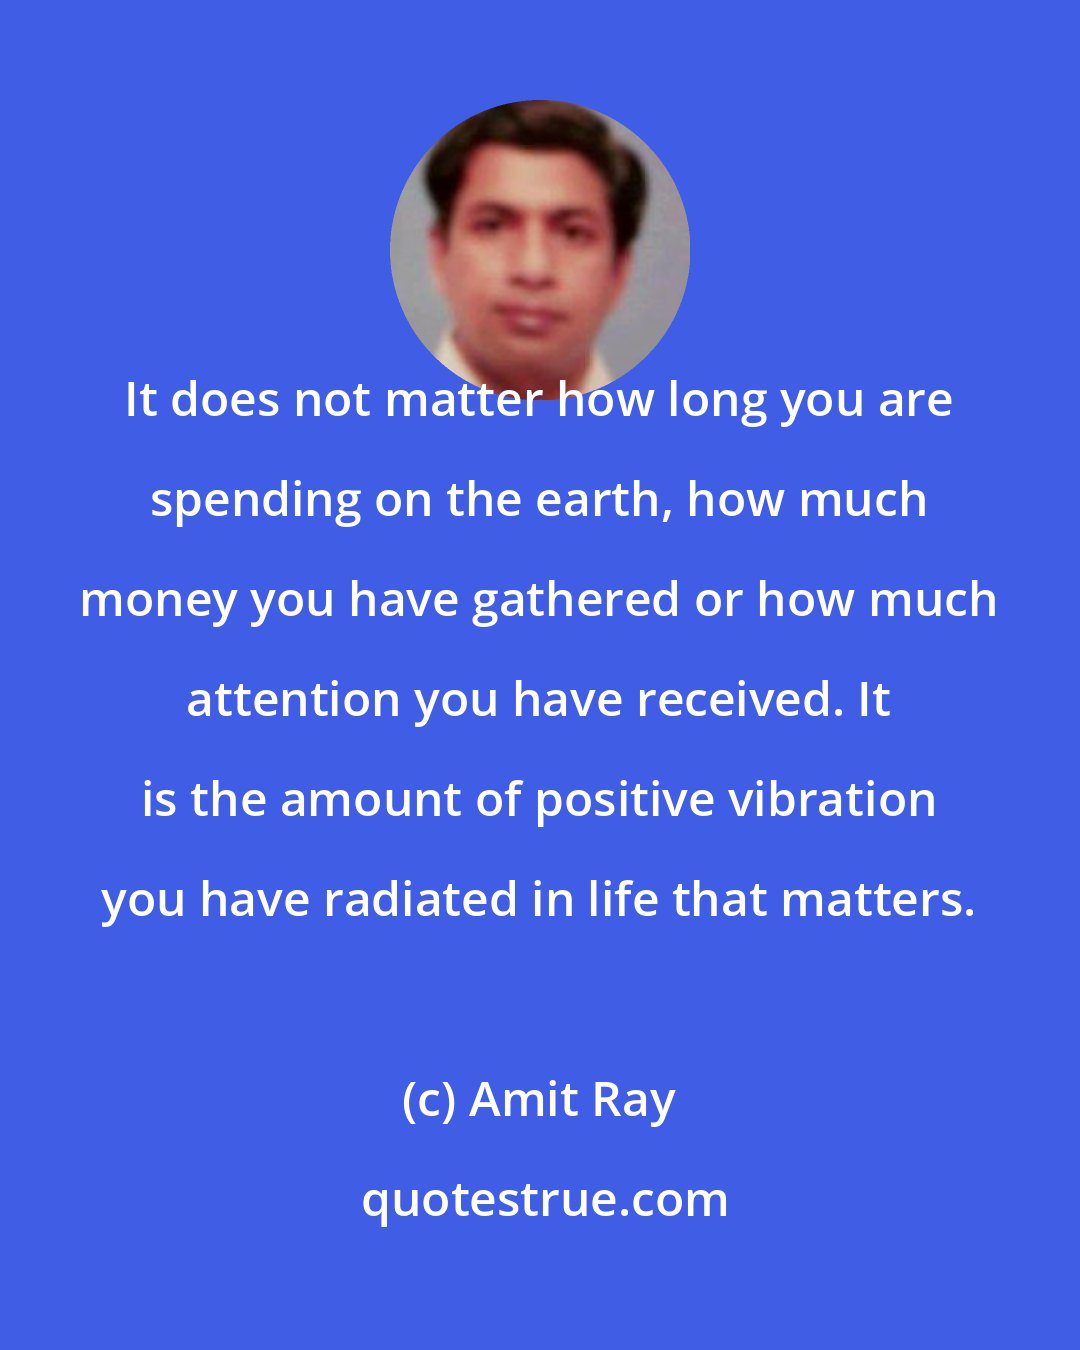 Amit Ray: It does not matter how long you are spending on the earth, how much money you have gathered or how much attention you have received. It is the amount of positive vibration you have radiated in life that matters.